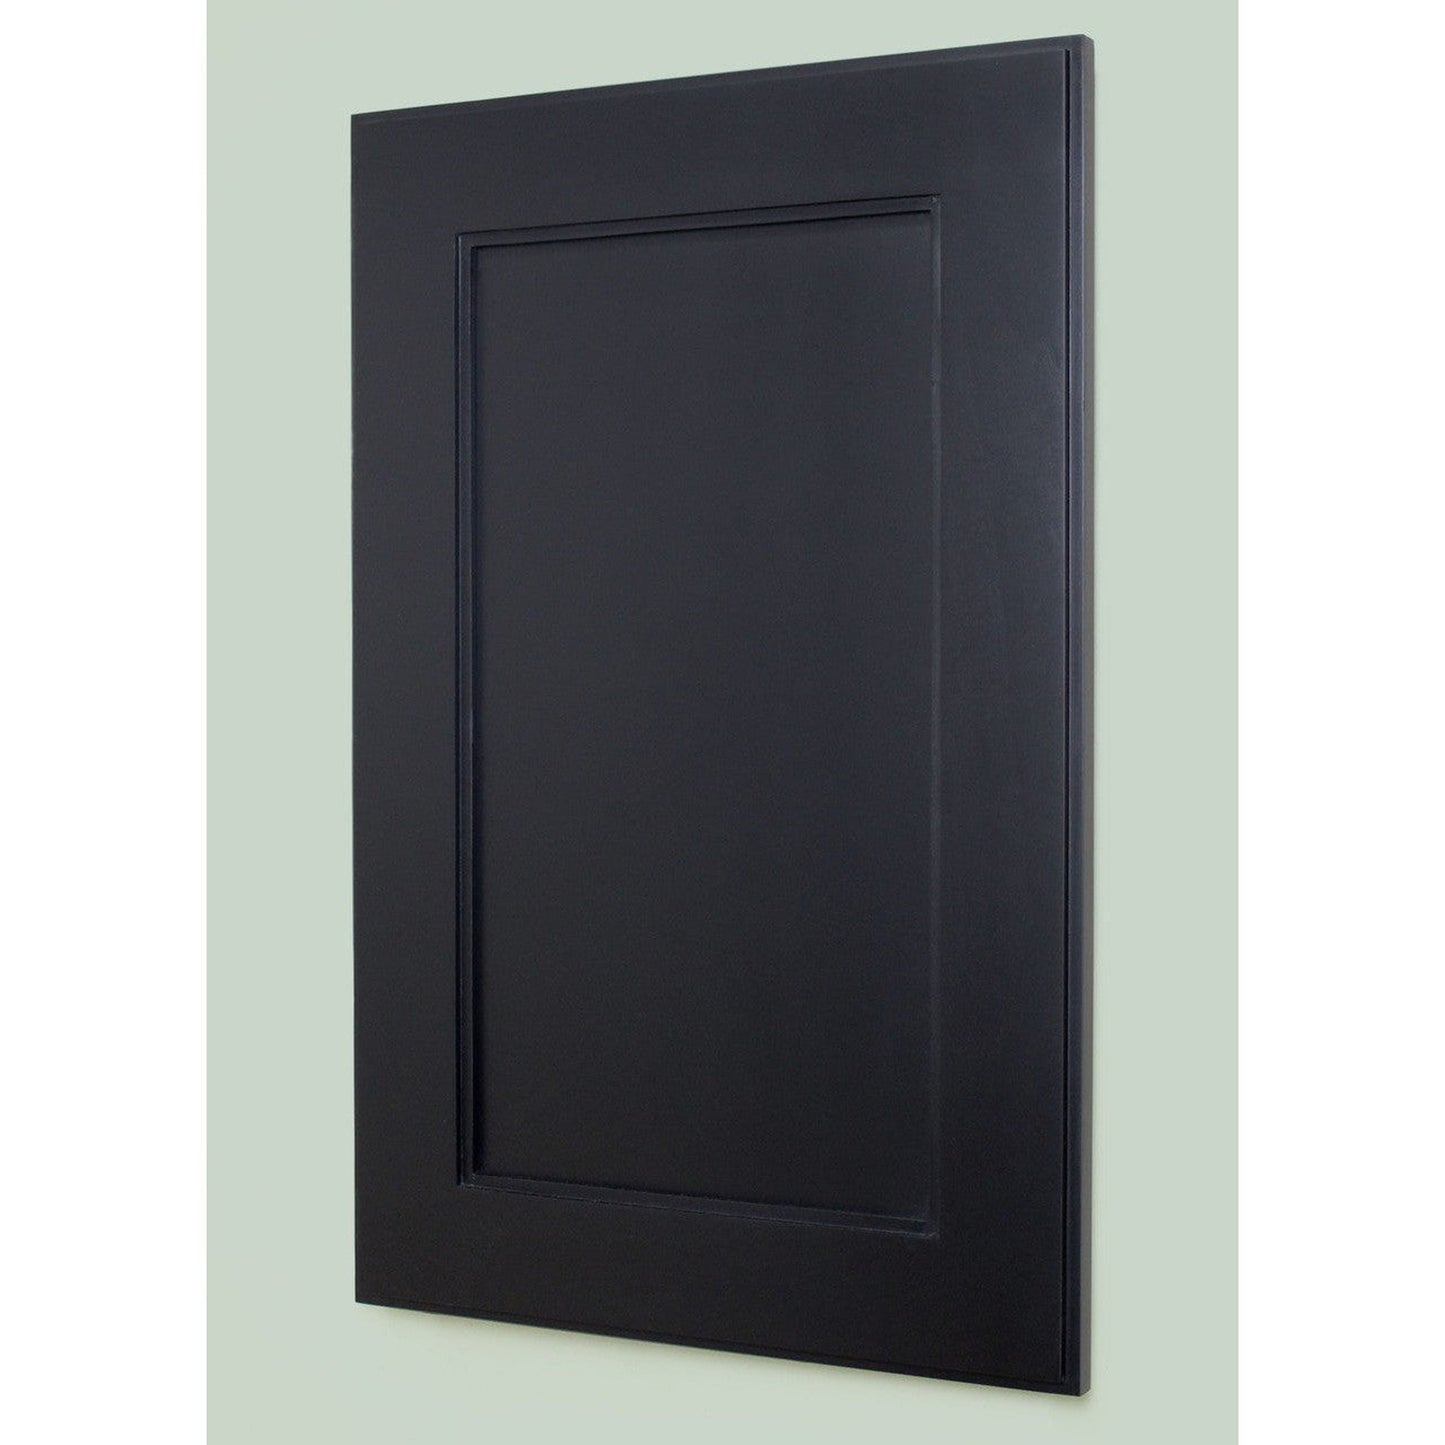 Fox Hollow Furnishings 14" x 24" Black Shaker Style White Interior Special 3" Depth Recessed Medicine Cabinet With Mirror